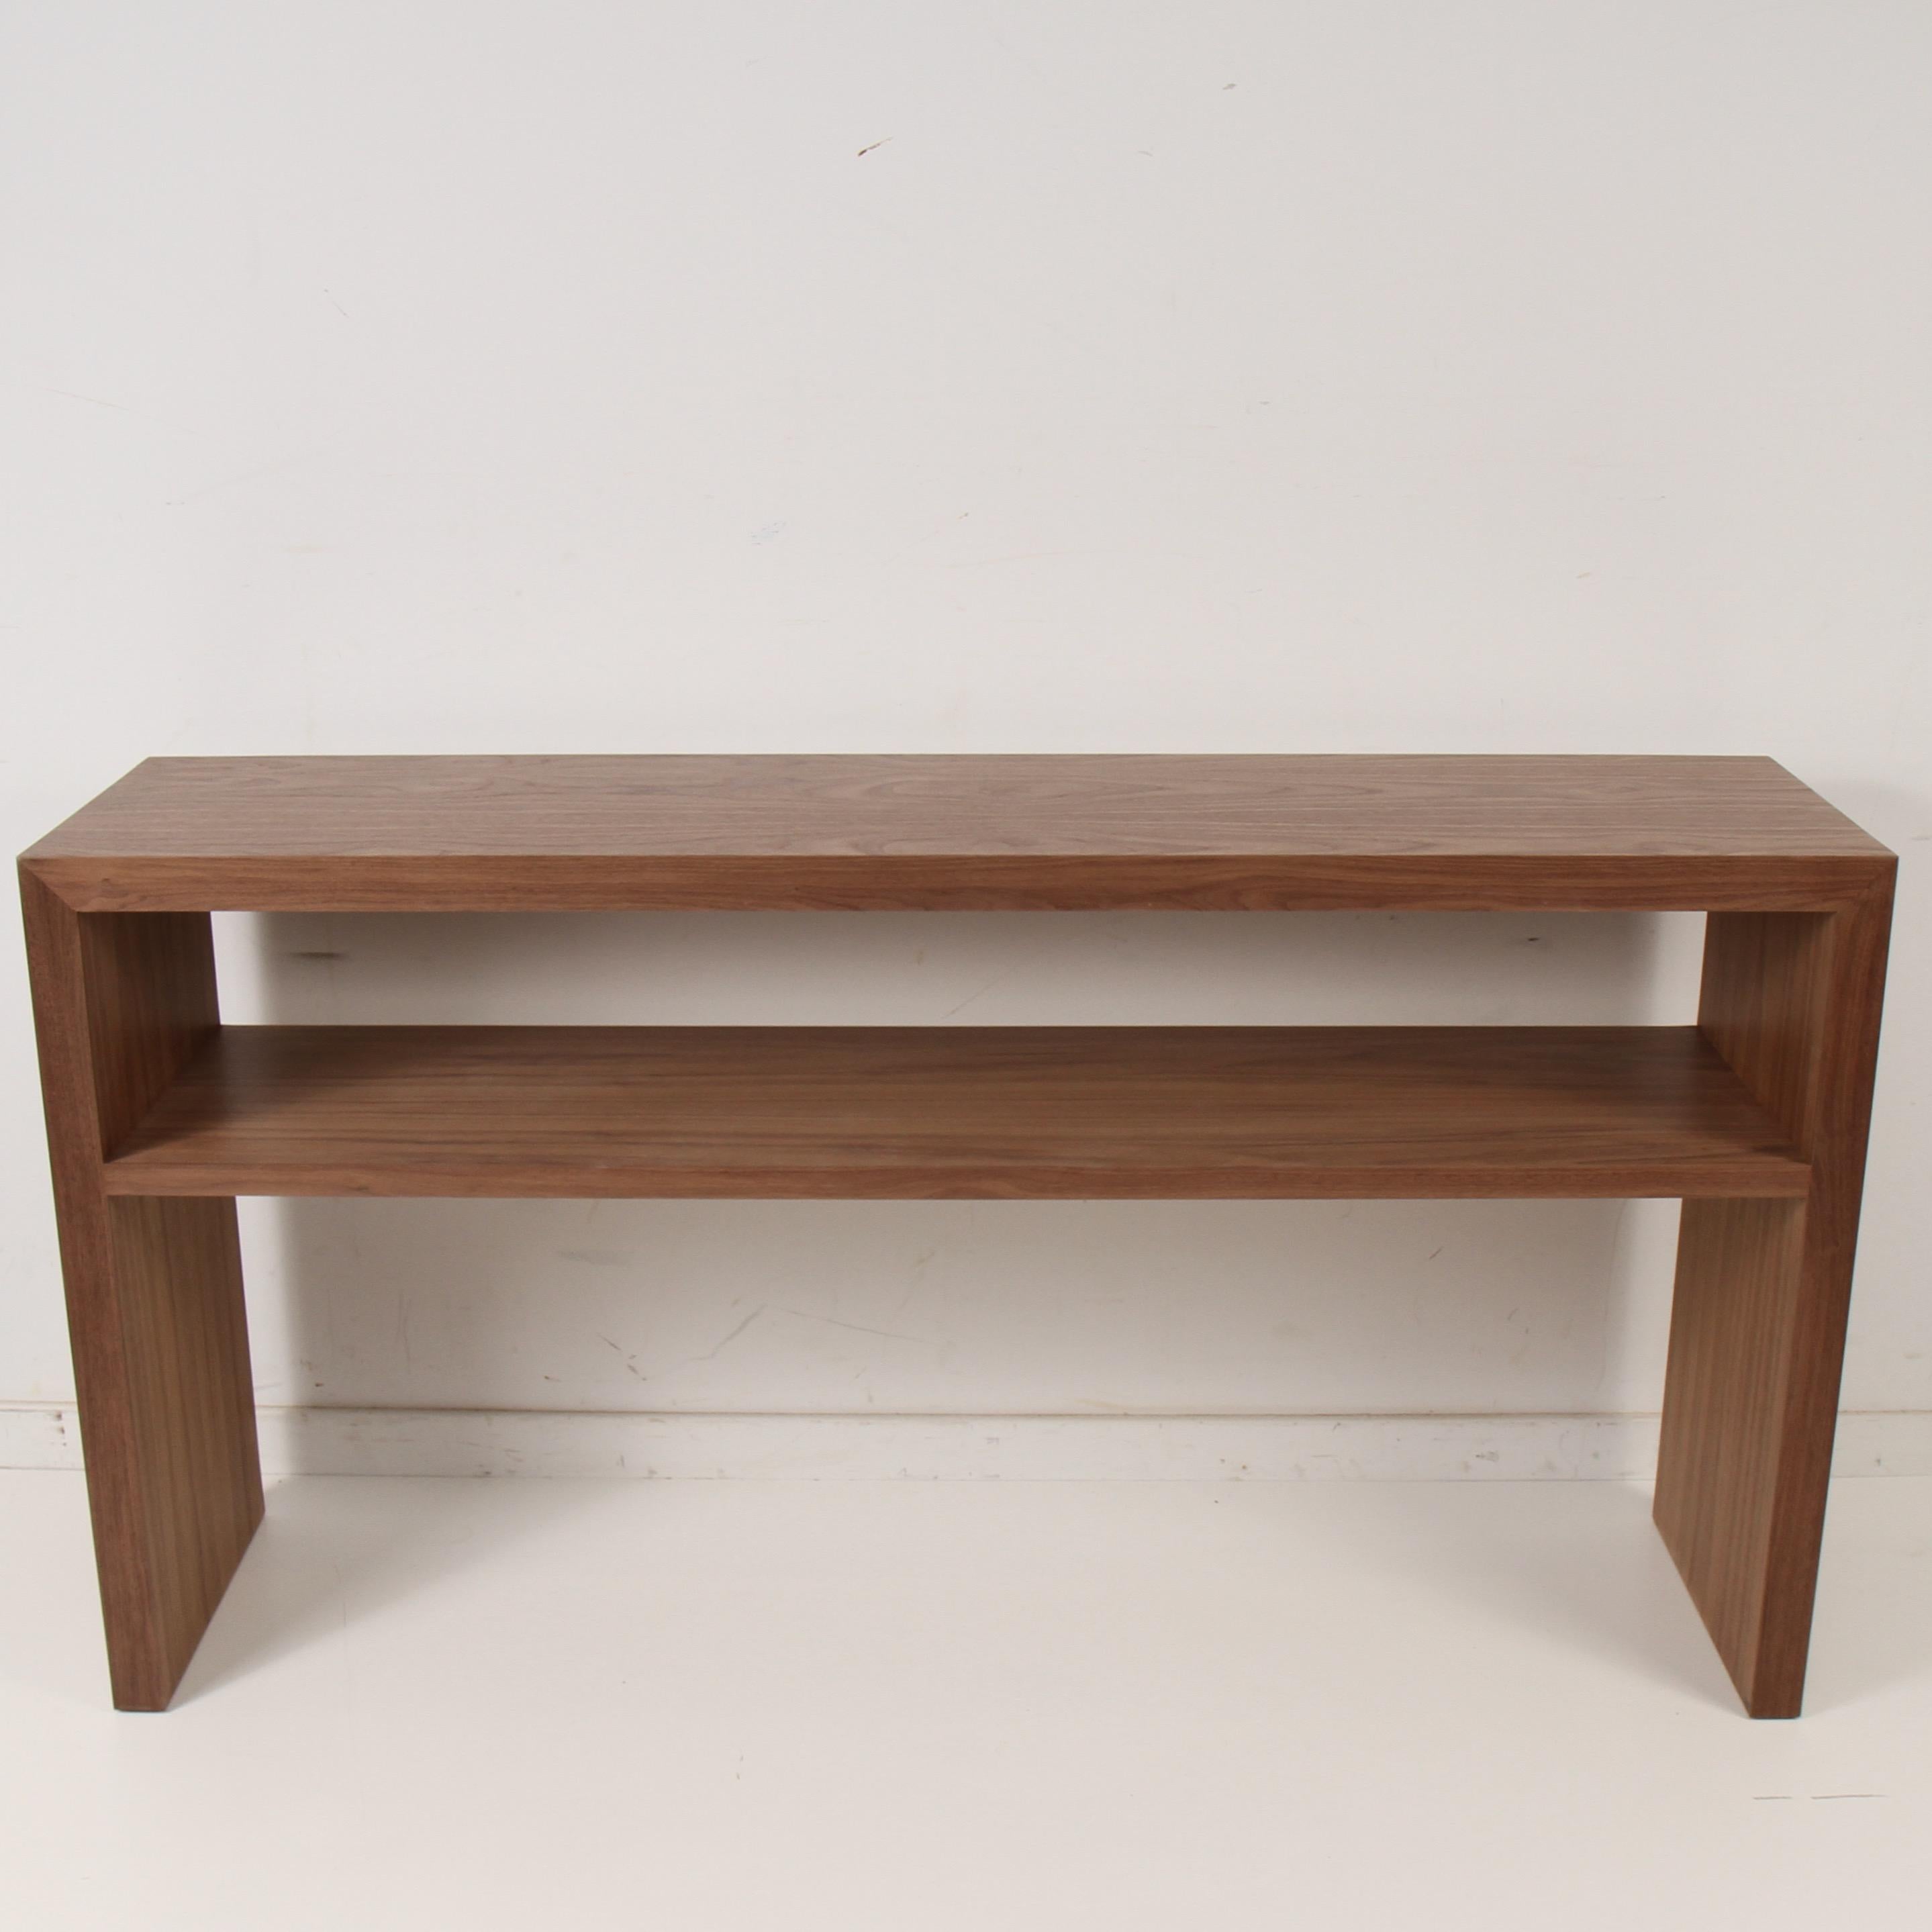 Modern console table by Samuel Greg. Made of walnut, with a lower shelf that stretches across table 23